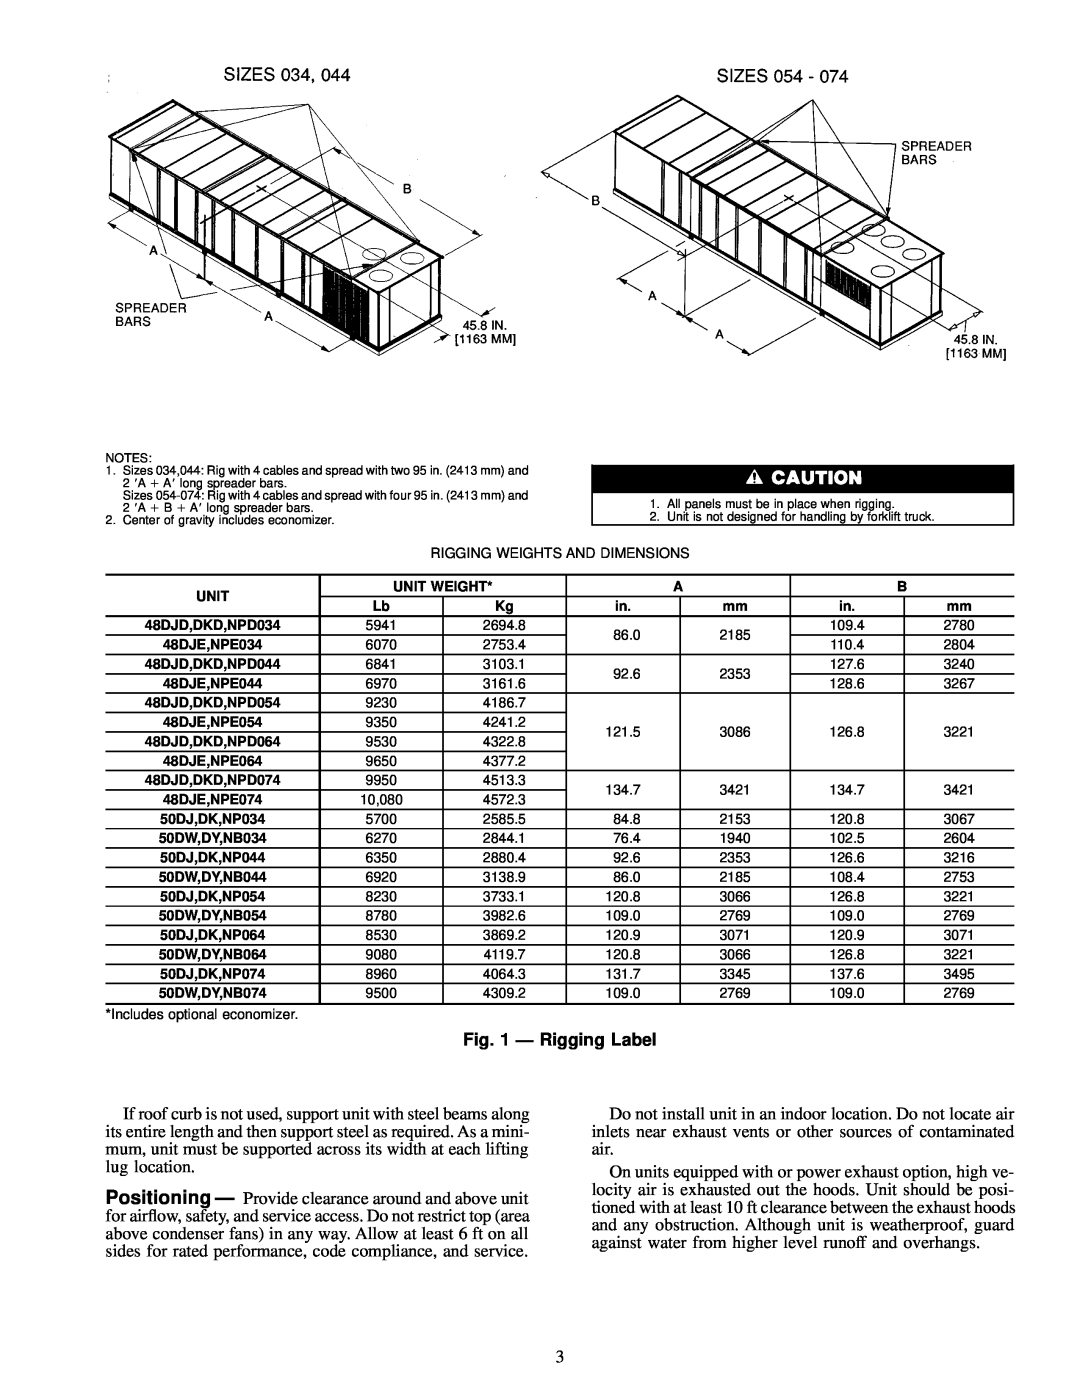 Carrier NP034-074 specifications Ð Rigging Label 